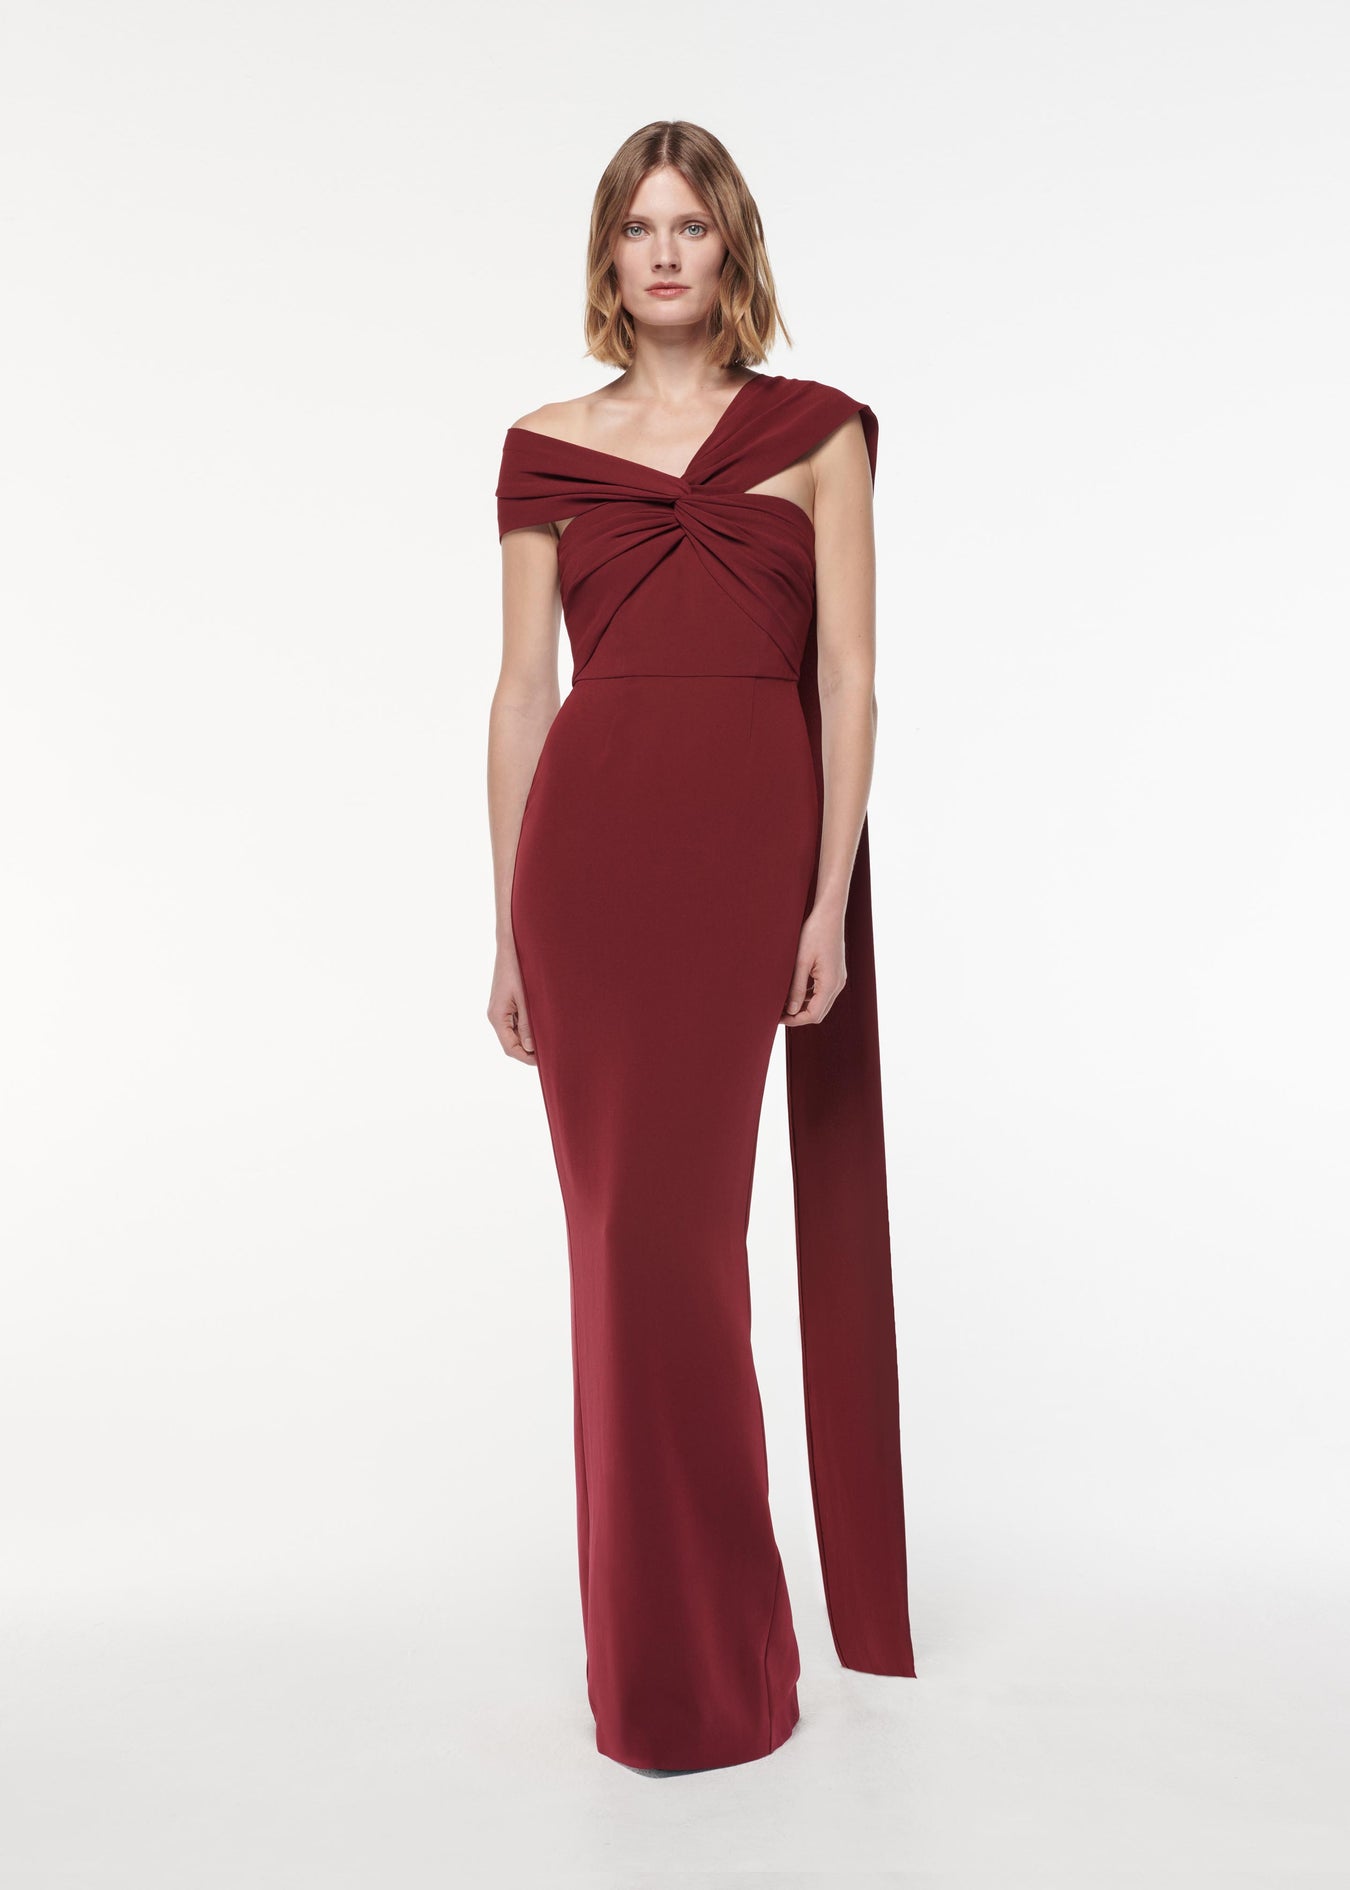 A photograph of a woman wearing aAsymmetric Light Cady Gown in Burgundy